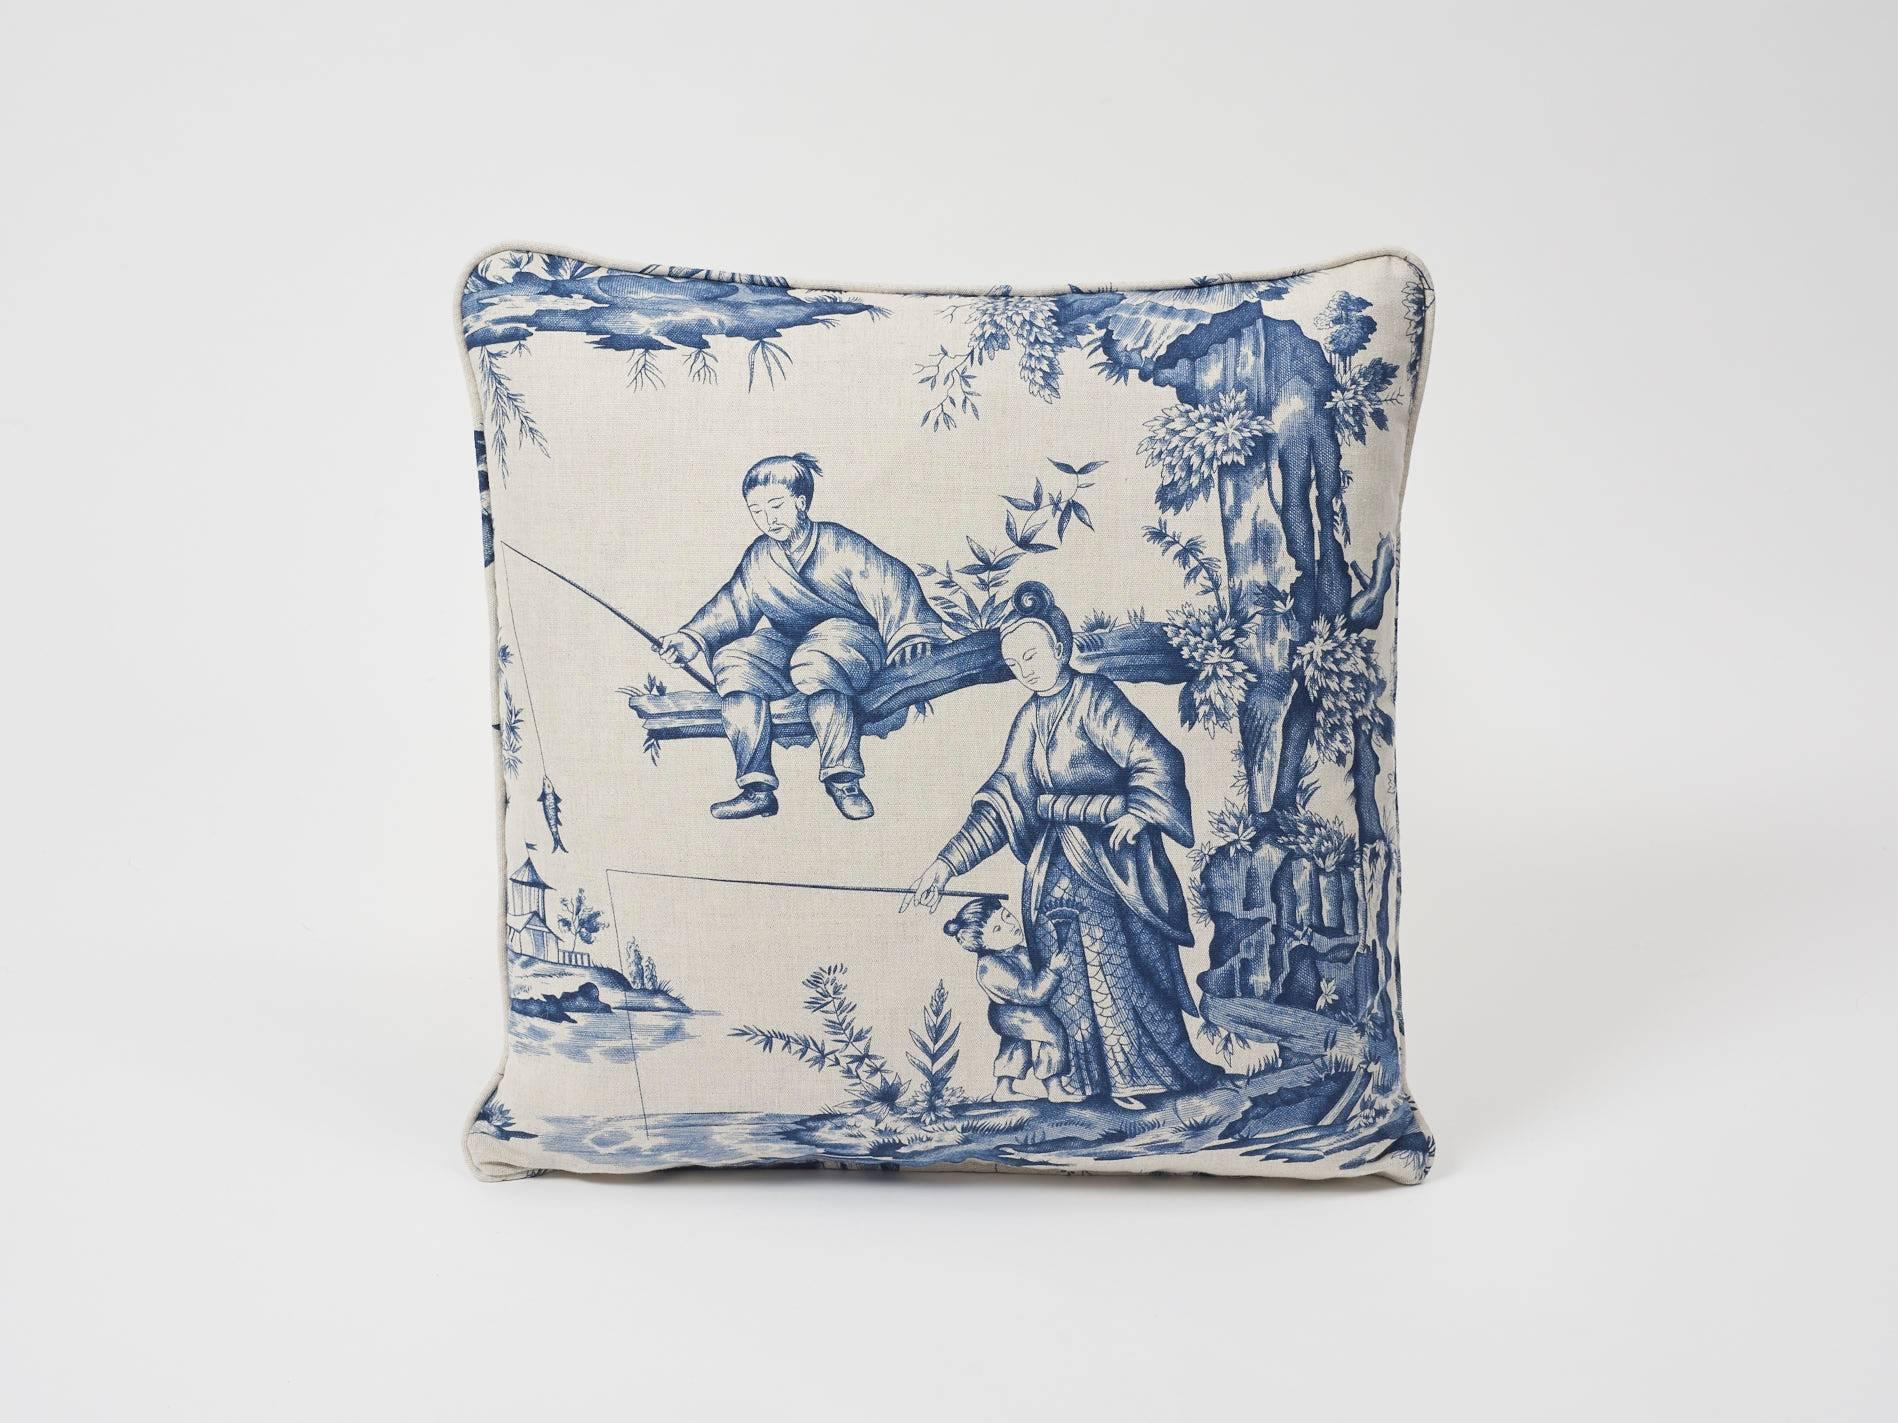 Shengyou Toile is based on a priceless 18th century document in our archives by court painter Jean-Baptiste Pillement. Hand-drawn, engraved and featured in an indigo colorway, this pattern has rich dimension. A Schumacher Classic now featured as a